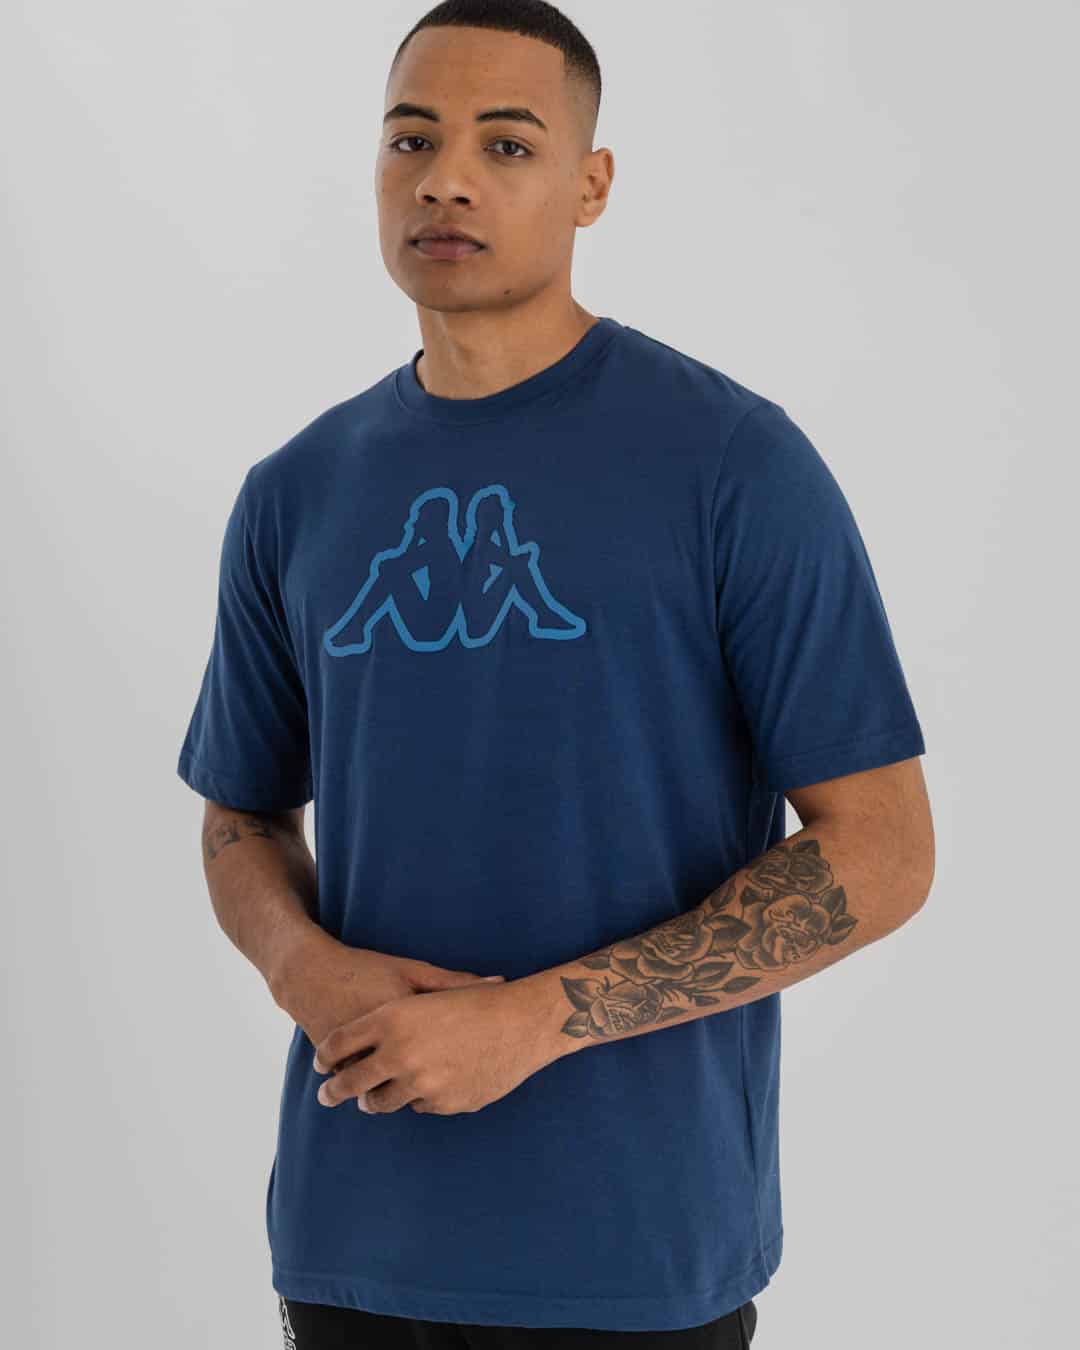 mid shot of man wearing navy Blue Kappa t-shirt with Kappa omini logo in blue on chest